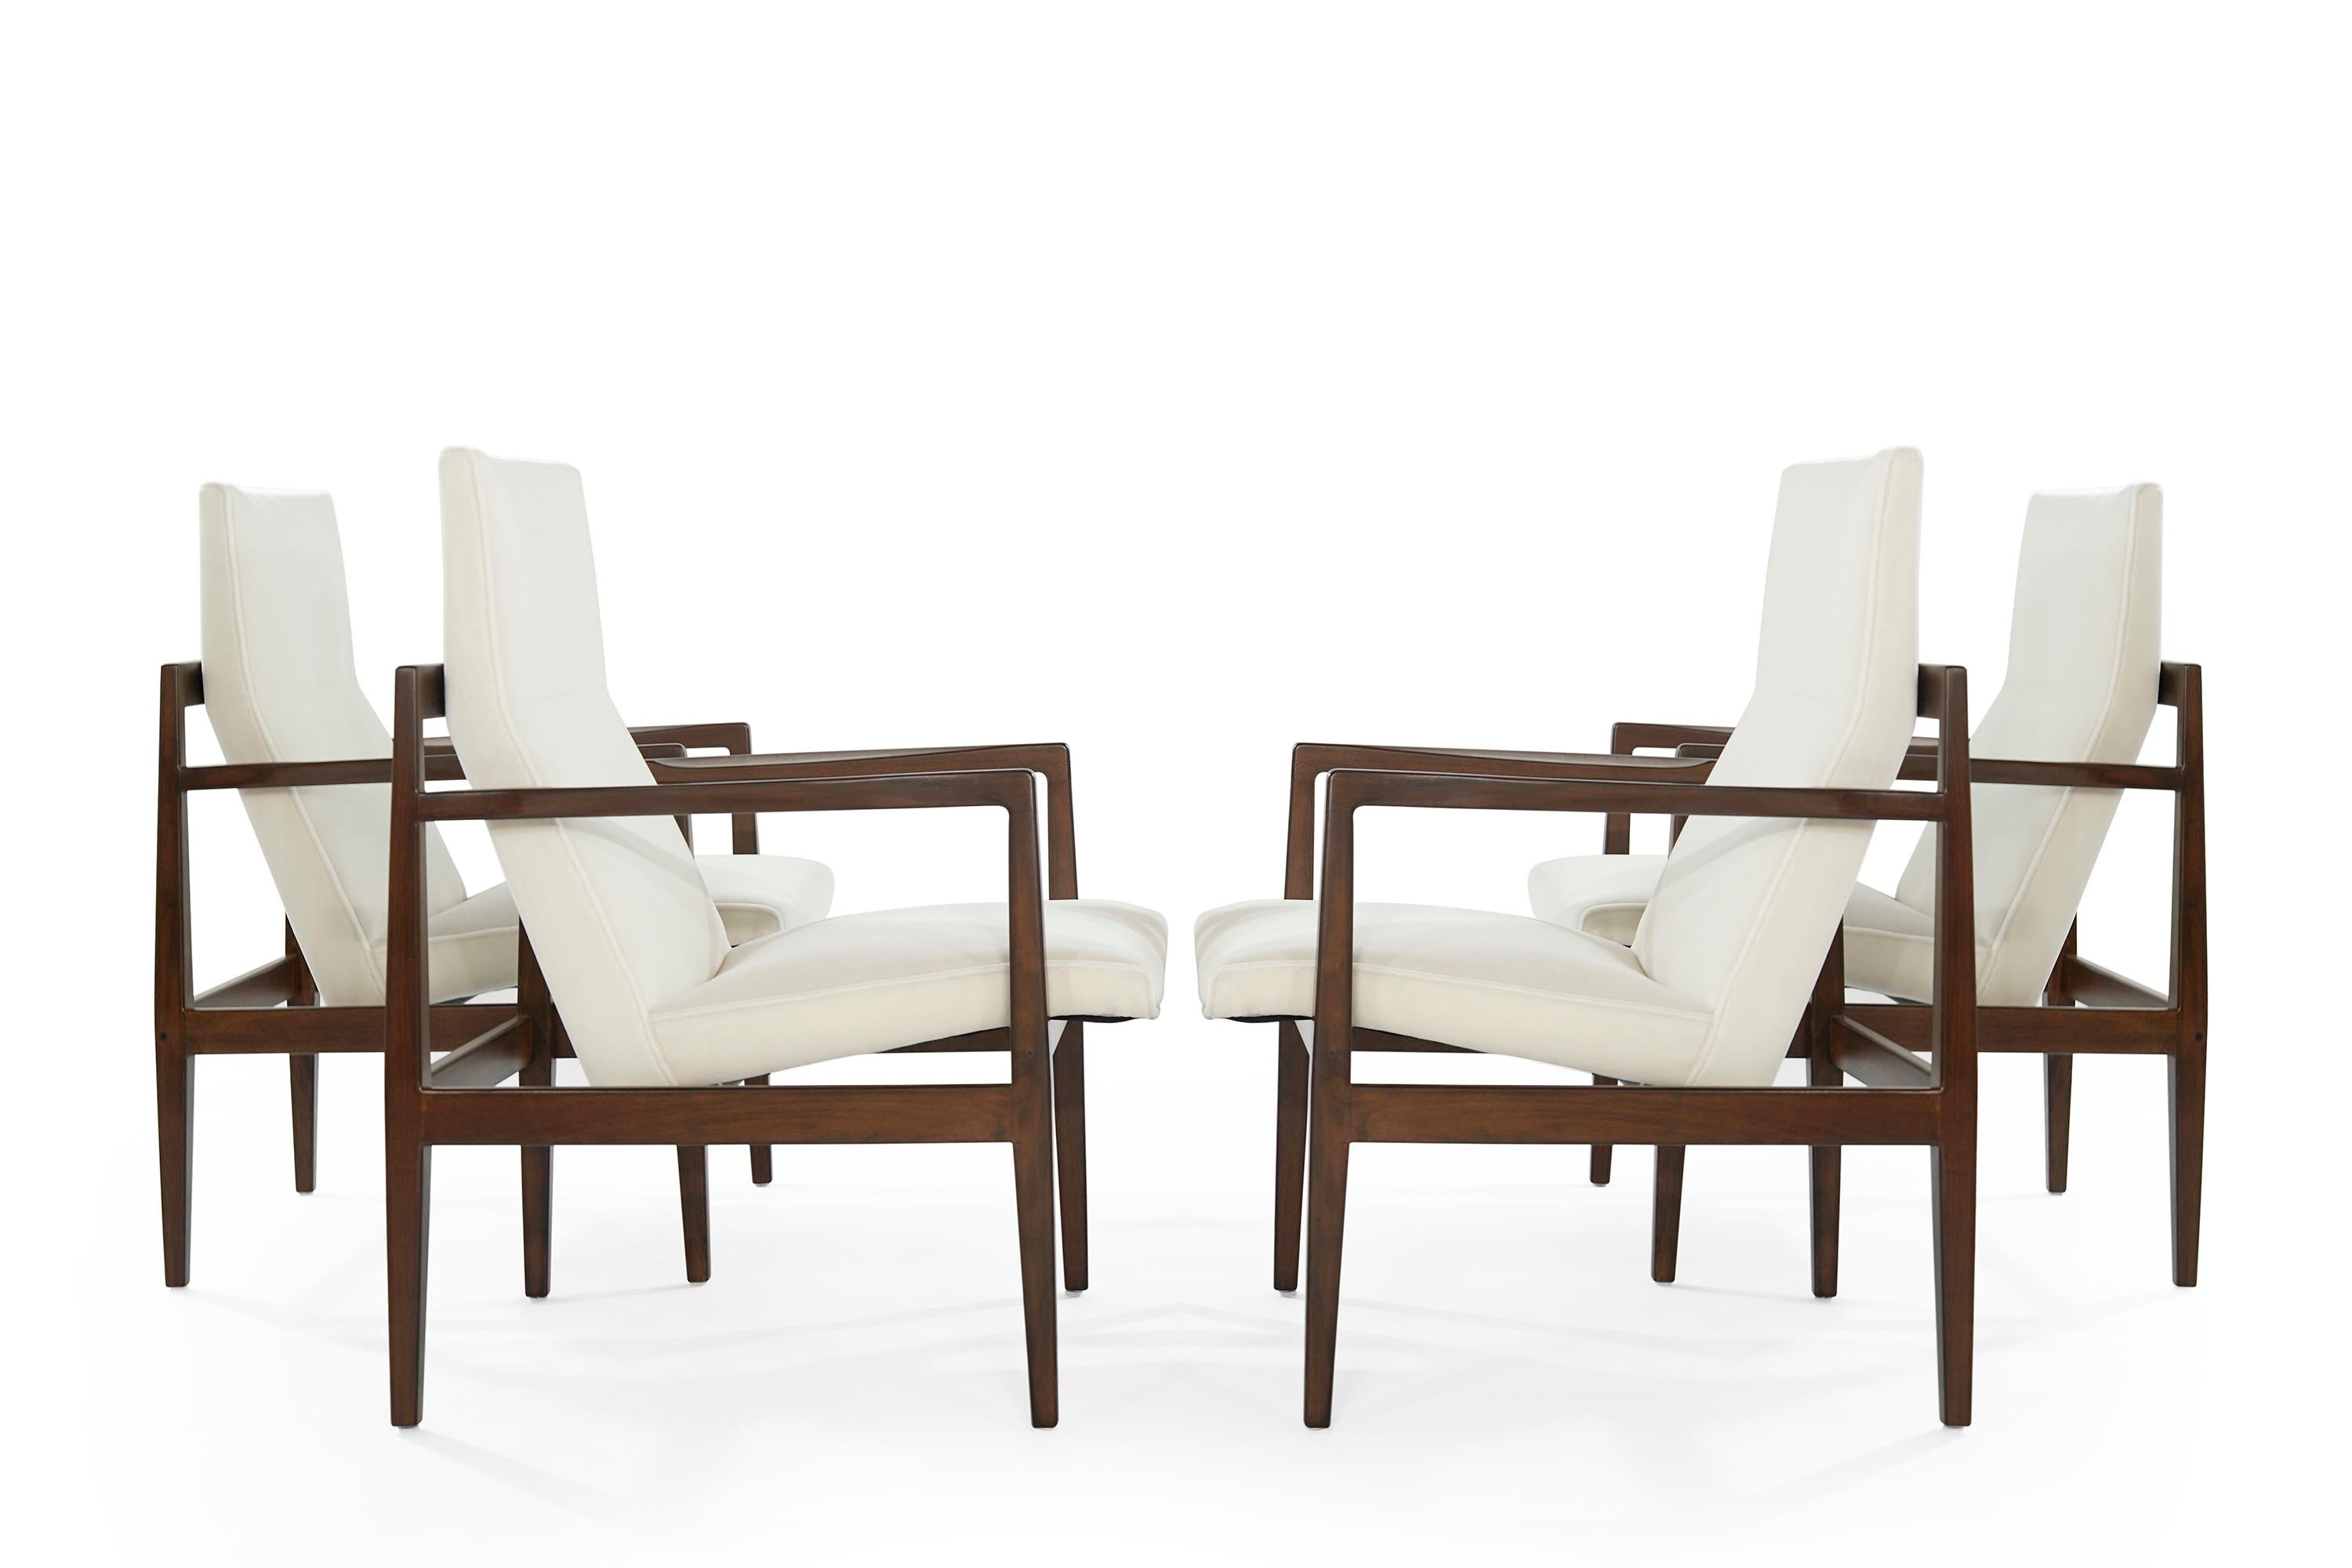 20th Century Set of Four Lounge Chairs by Jens Risom, c. 1960s